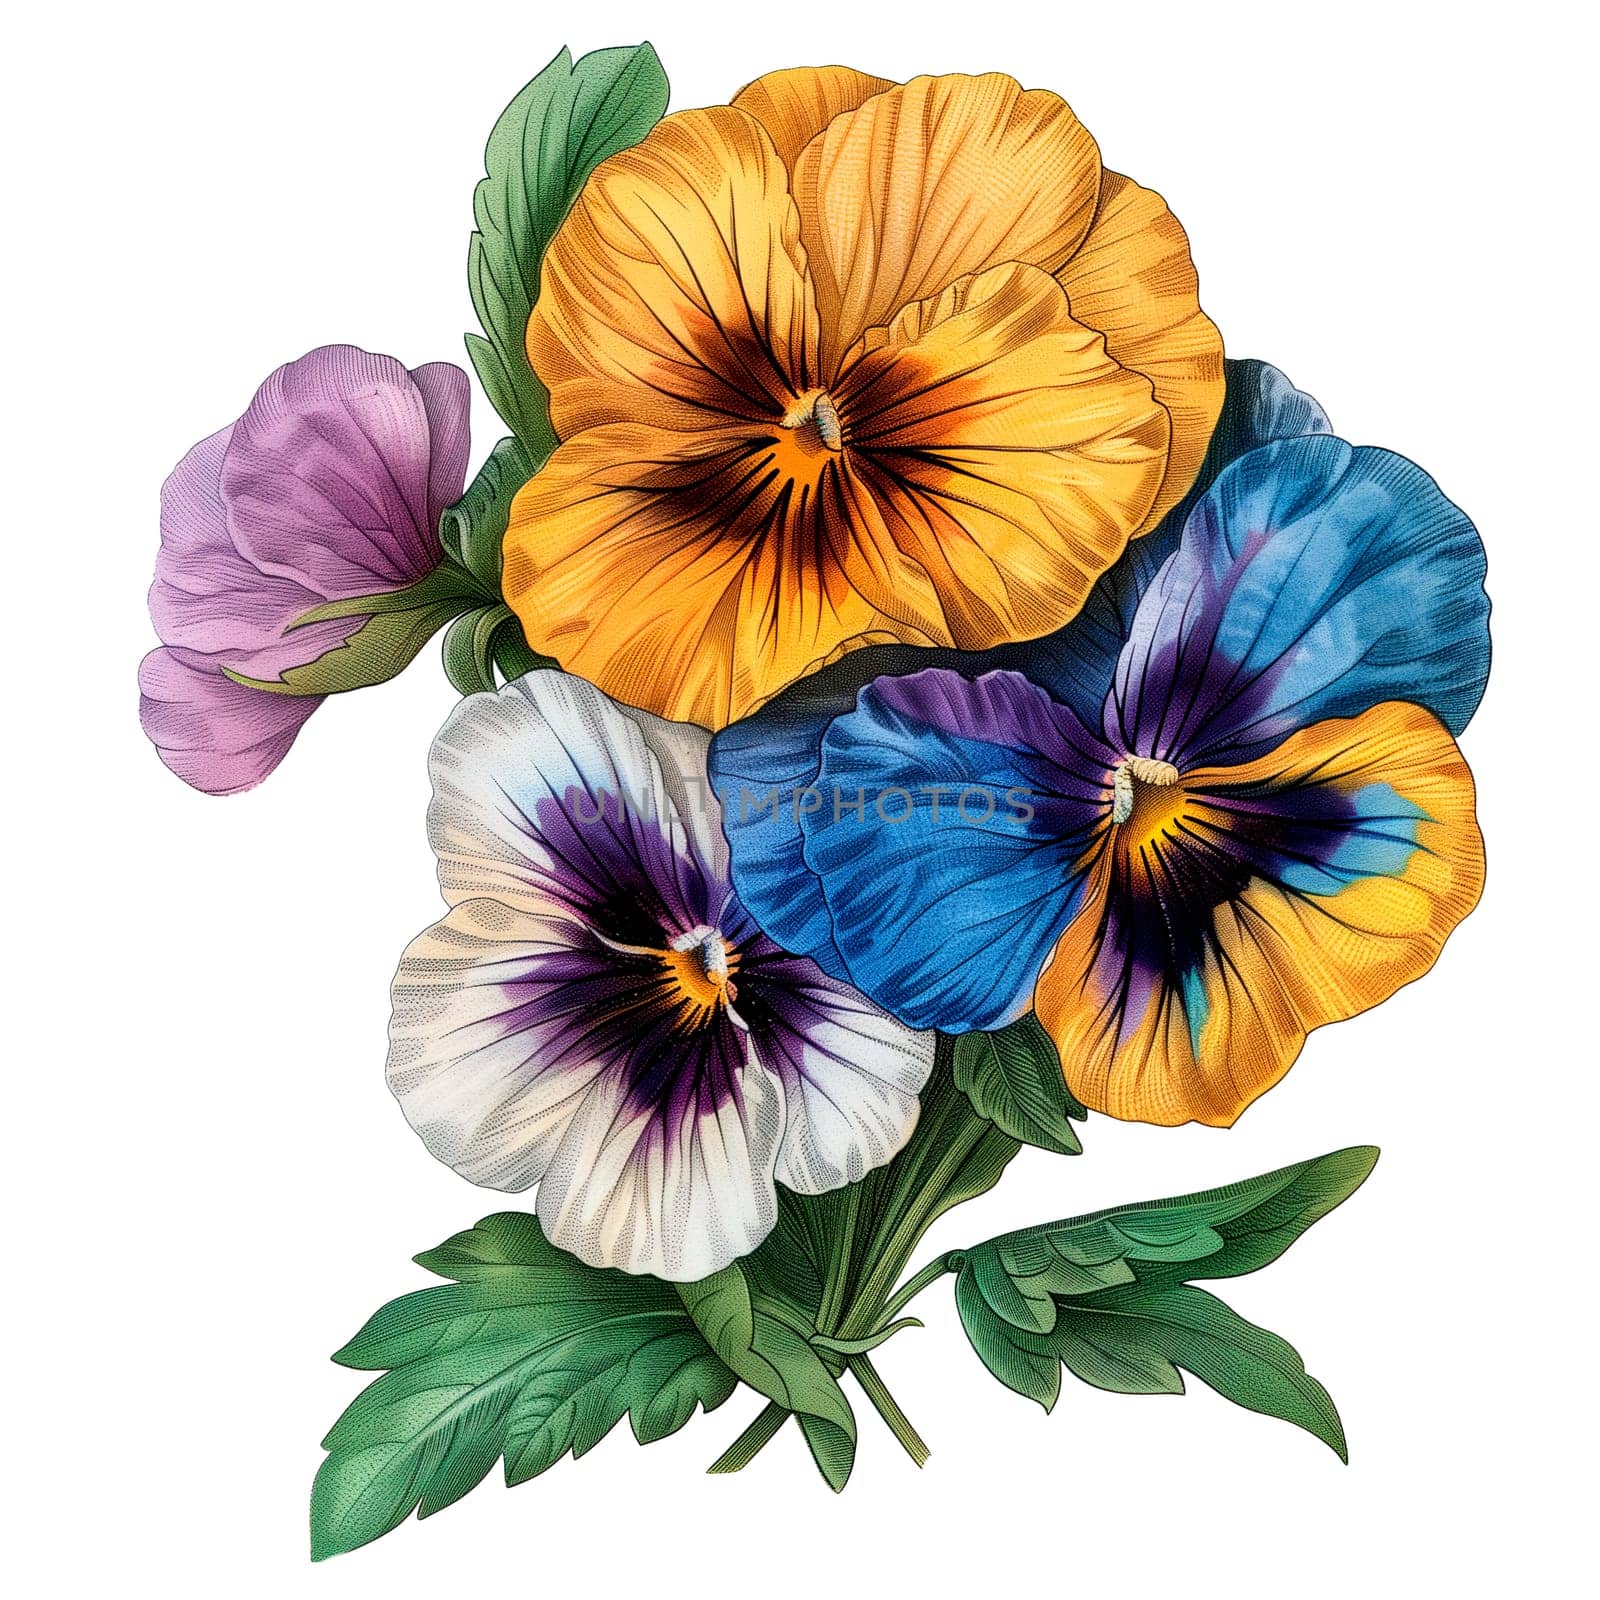 Isolated illustration of colorful pansy flower by Dustick